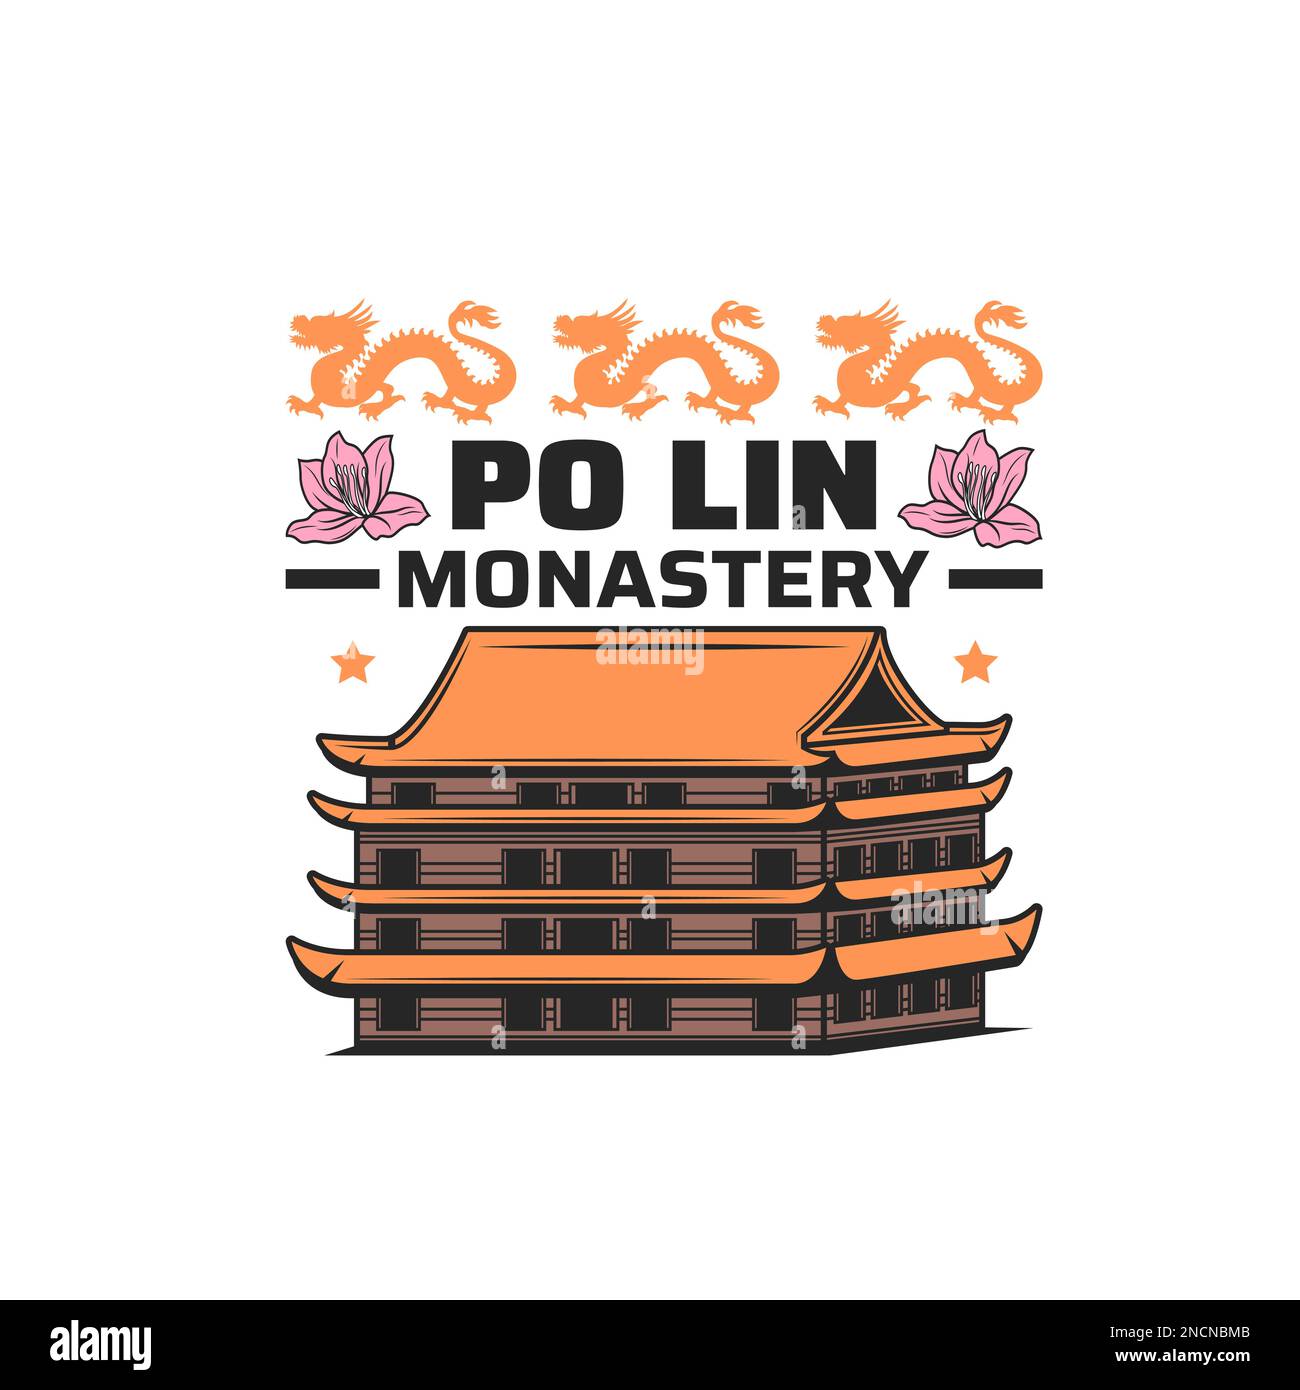 Po Lin monastery. Hong Kong travel icon. Asian journey or Hong Kong trip vintage symbol, emblem or vector icon with Buddhism or Taosism religion temple or nunnery pagoda building, travel landmark Stock Vector